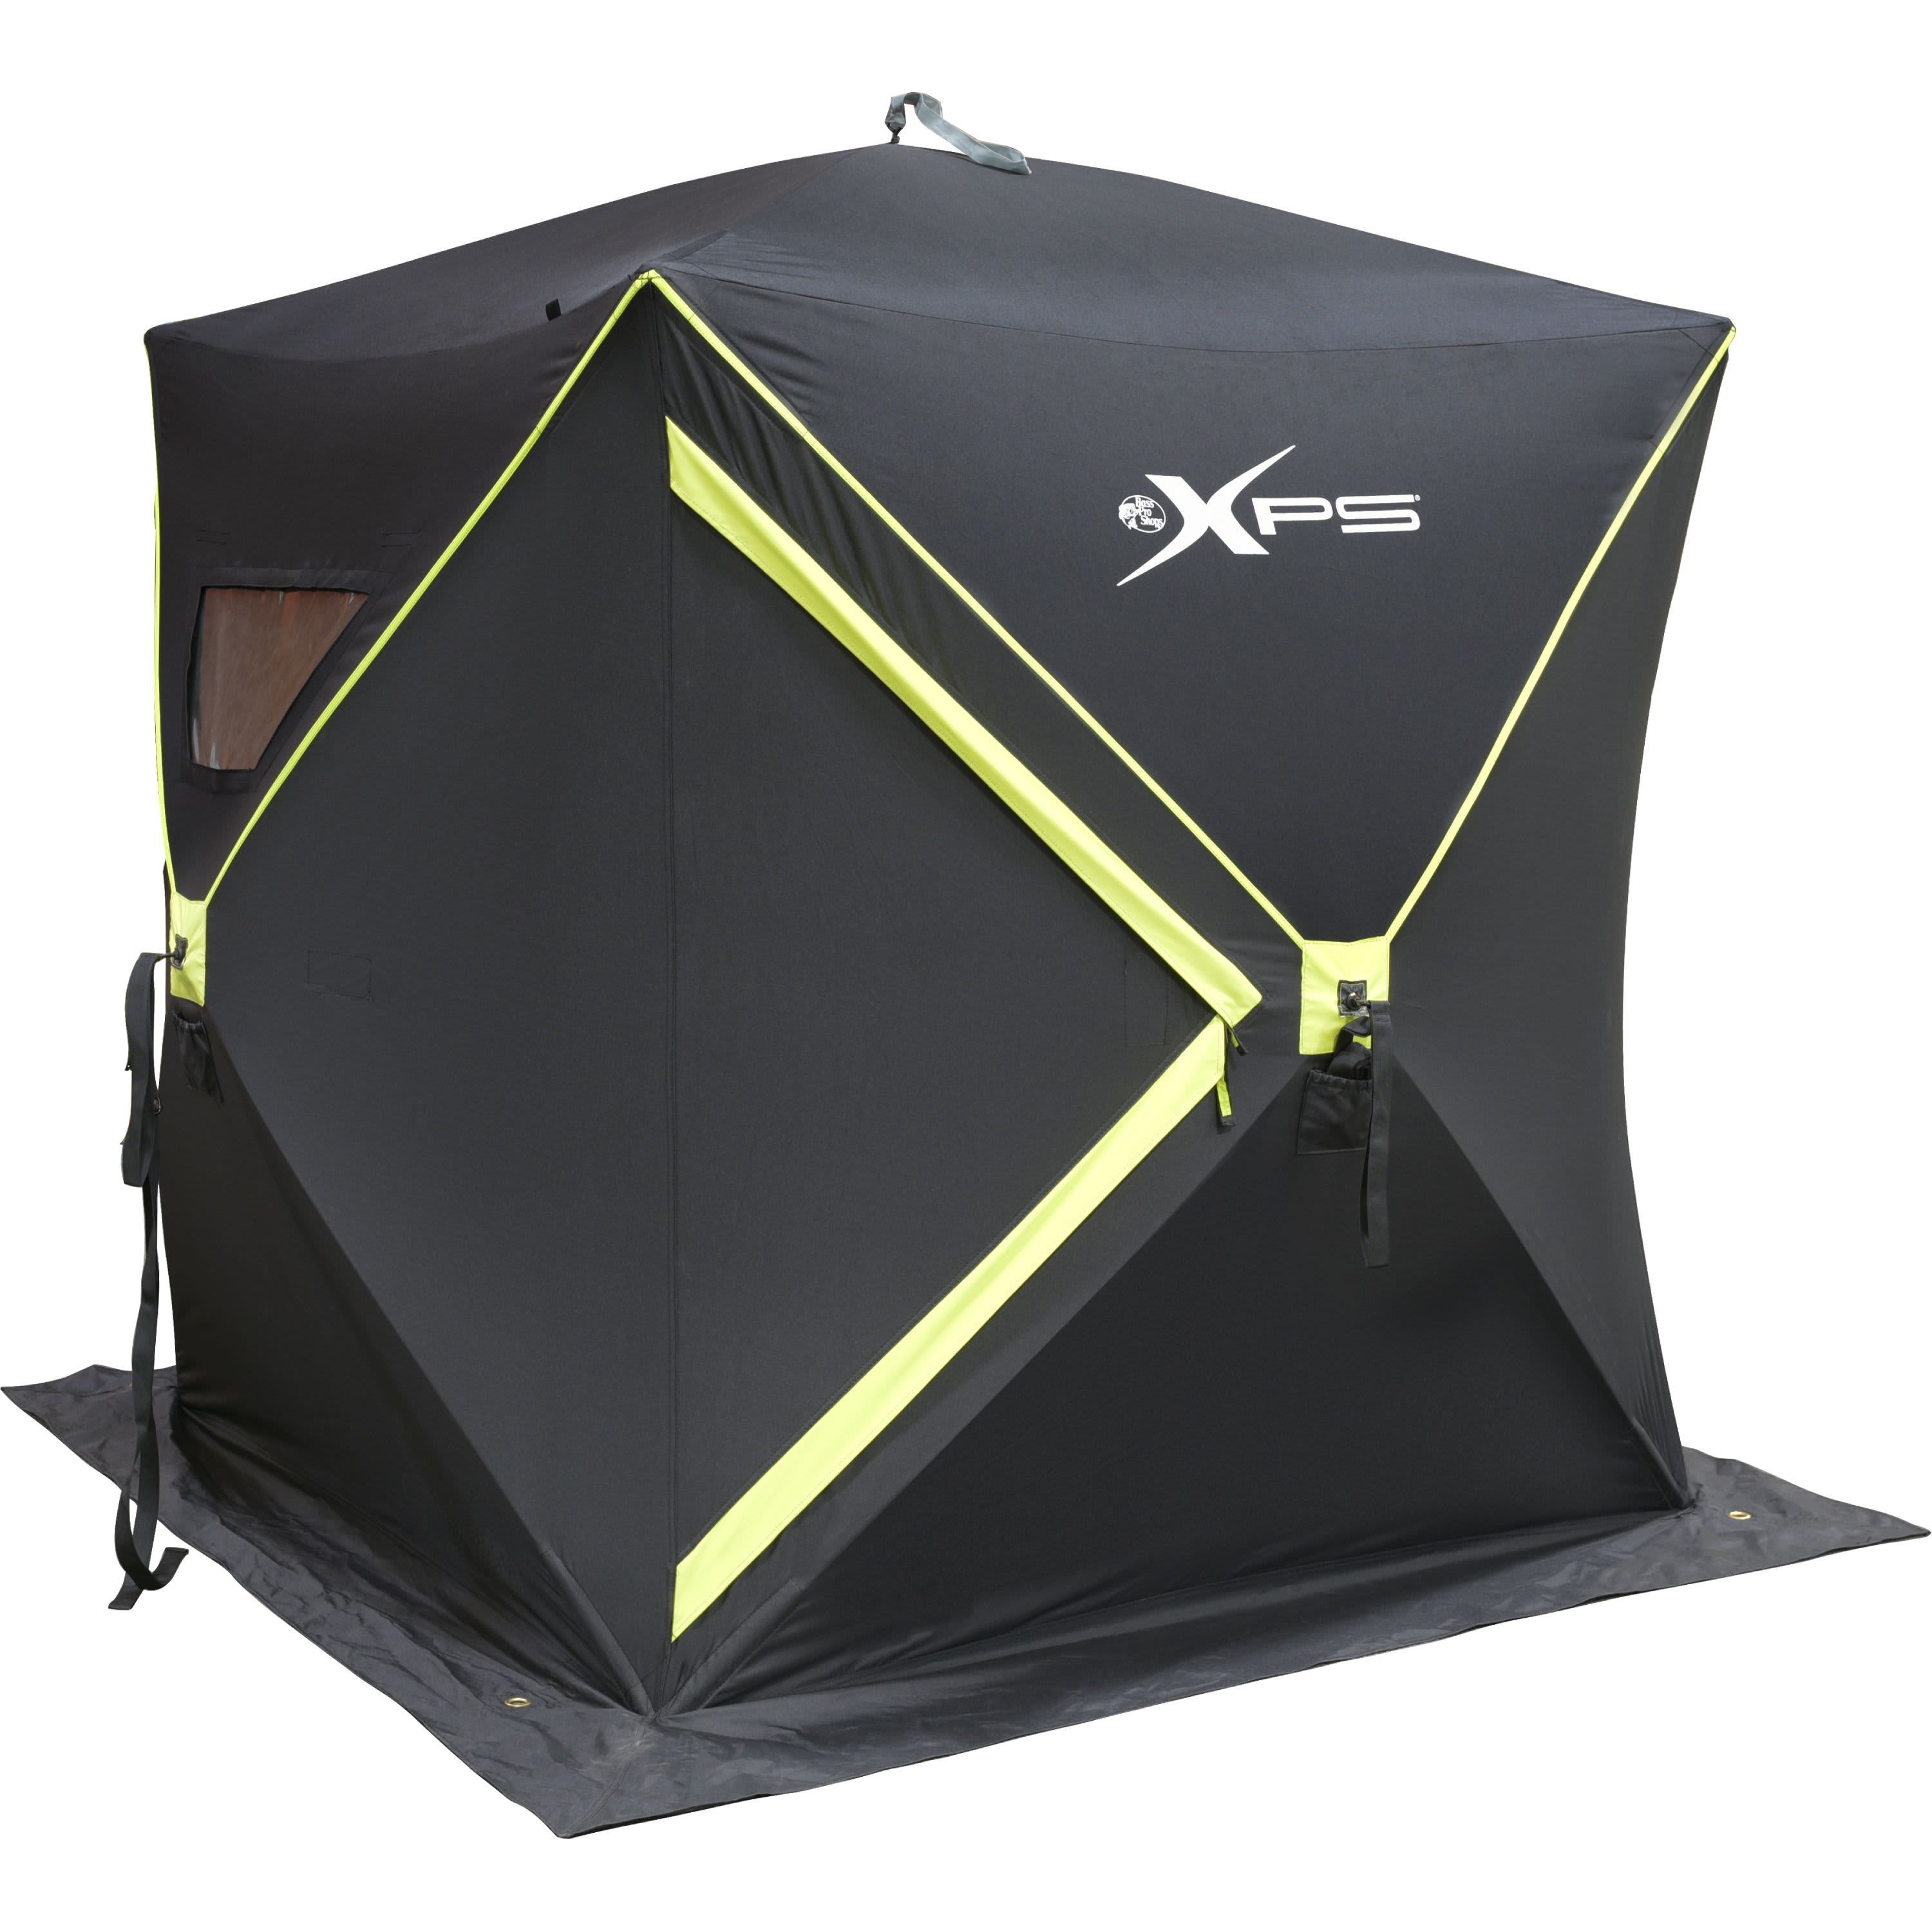 Bass Pro Shops® XPS® 2-Person Ice Shelter